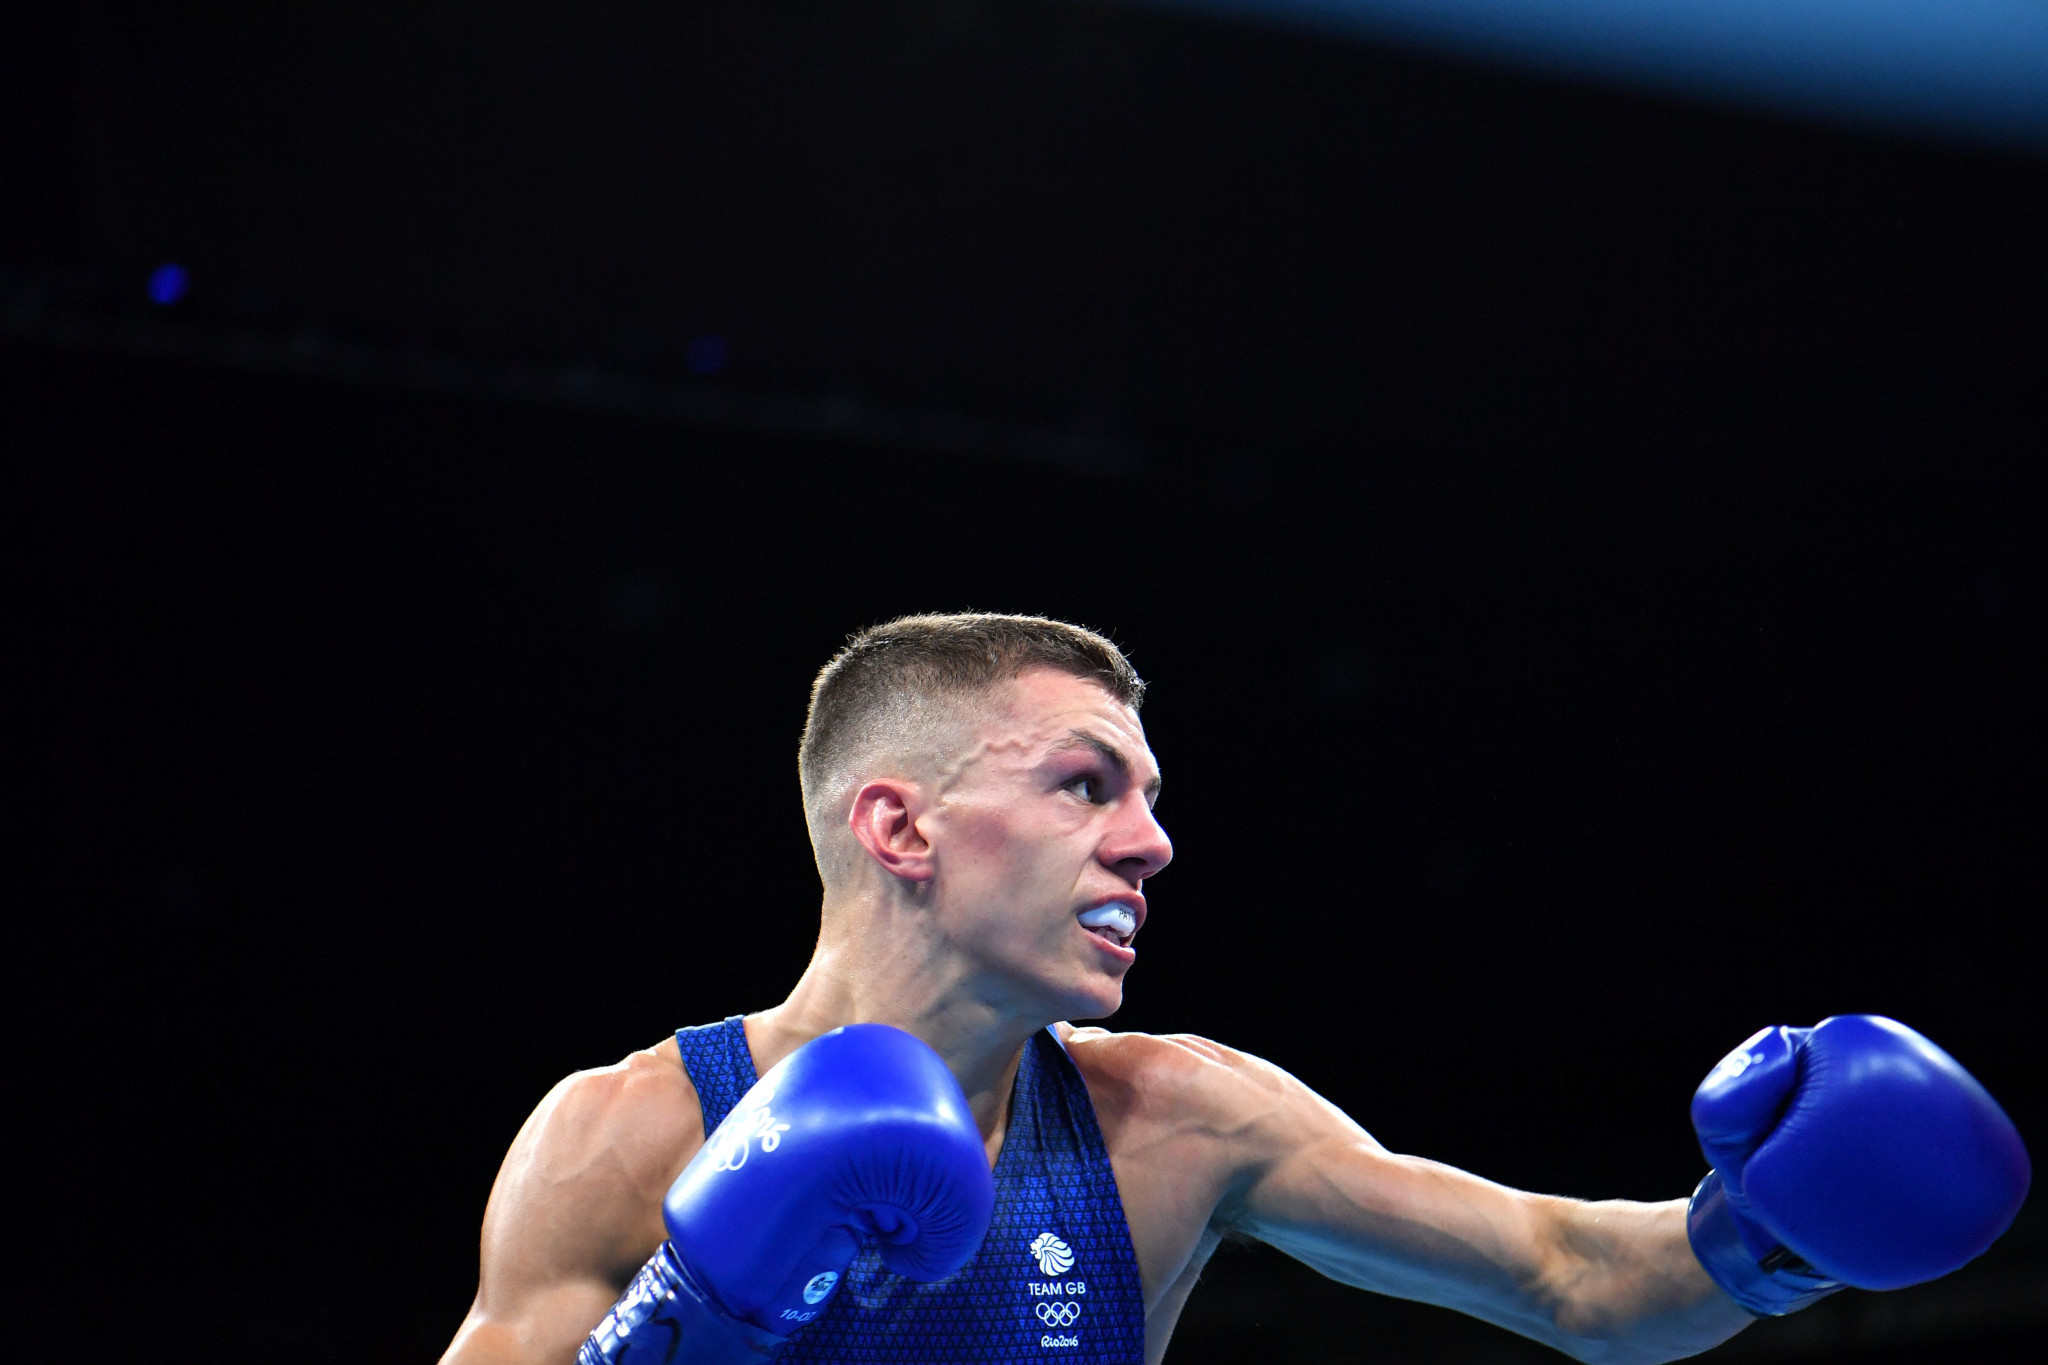 Rio 2016 Olympian Pat McCormack will be looking to help British Lionhearts claim their first victory of the season ©Getty Images